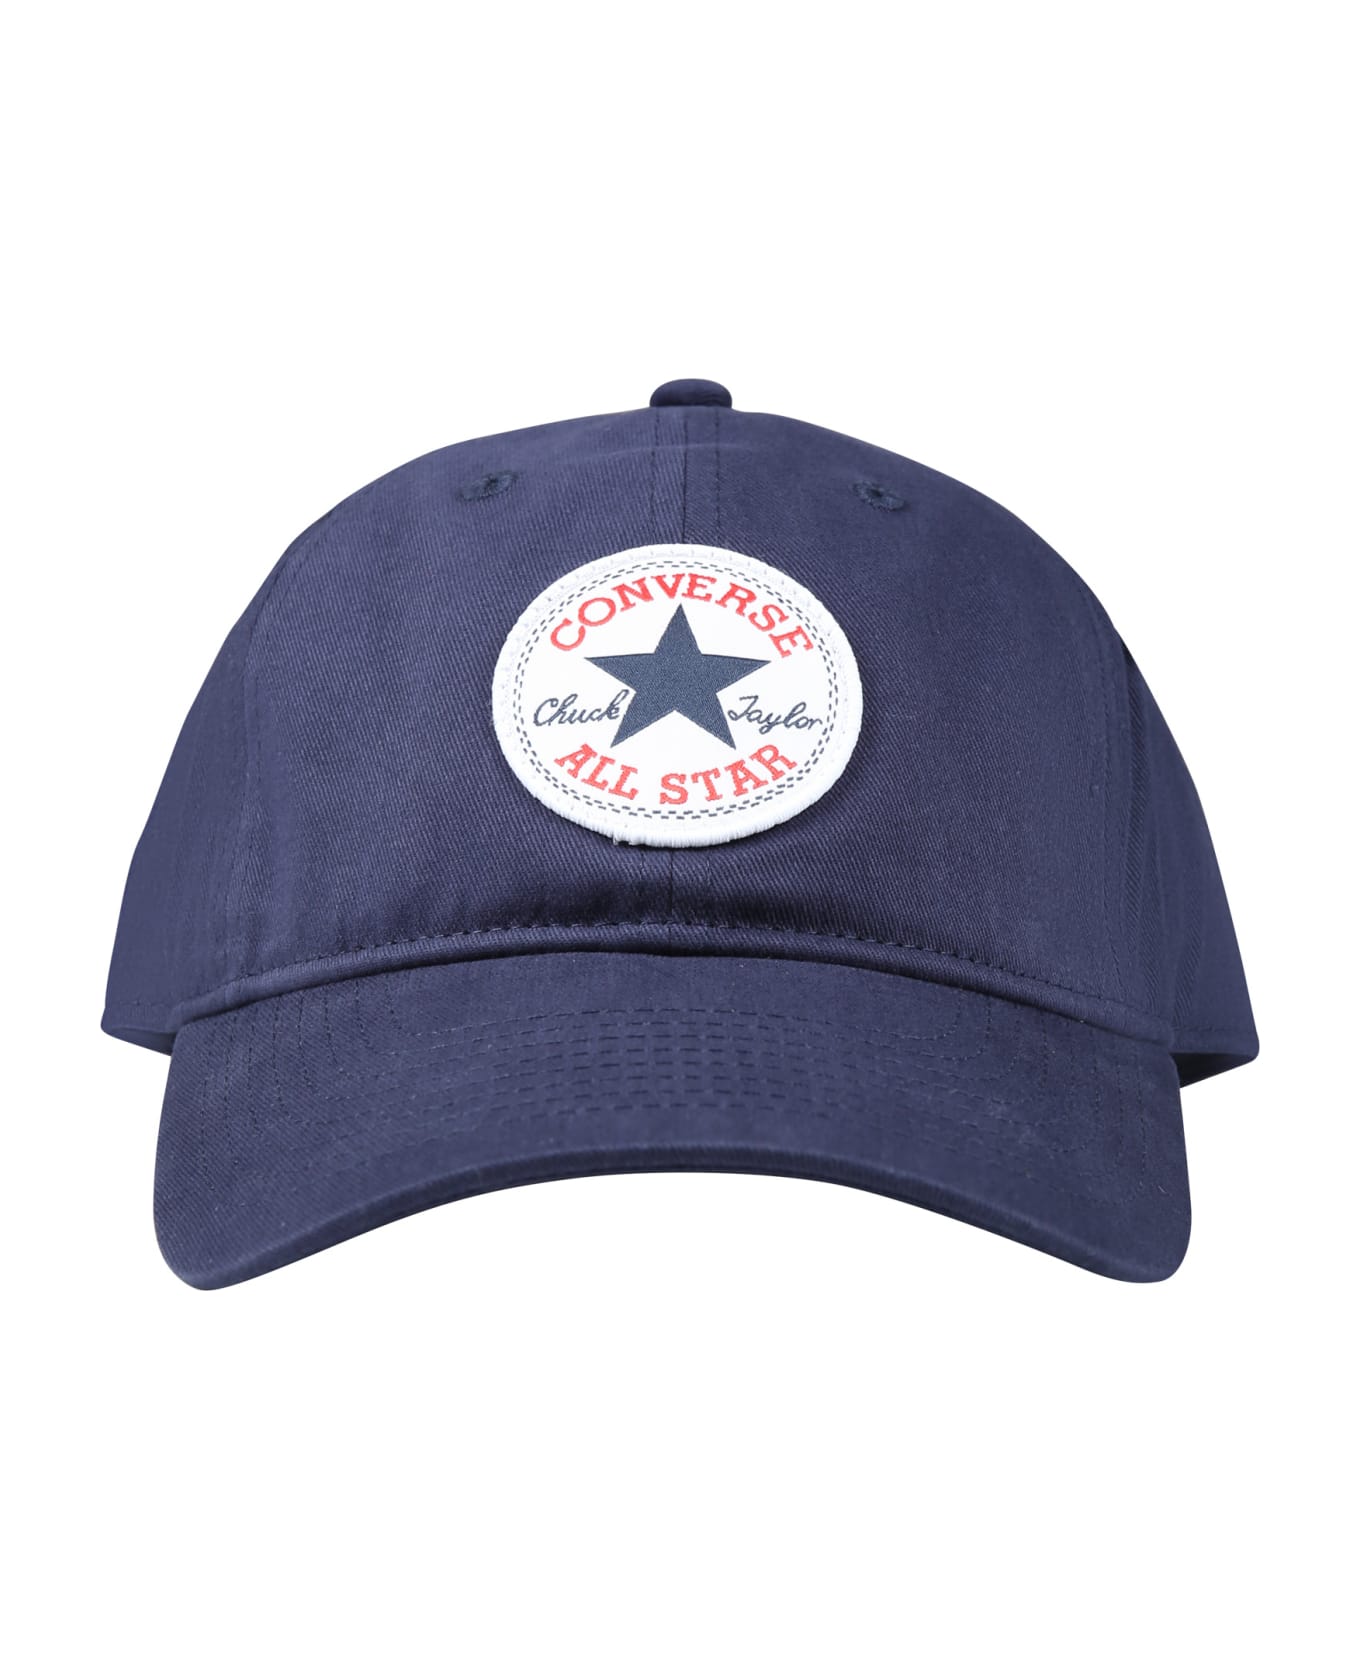 Converse Blue Hat For Kids With Visor - Blue